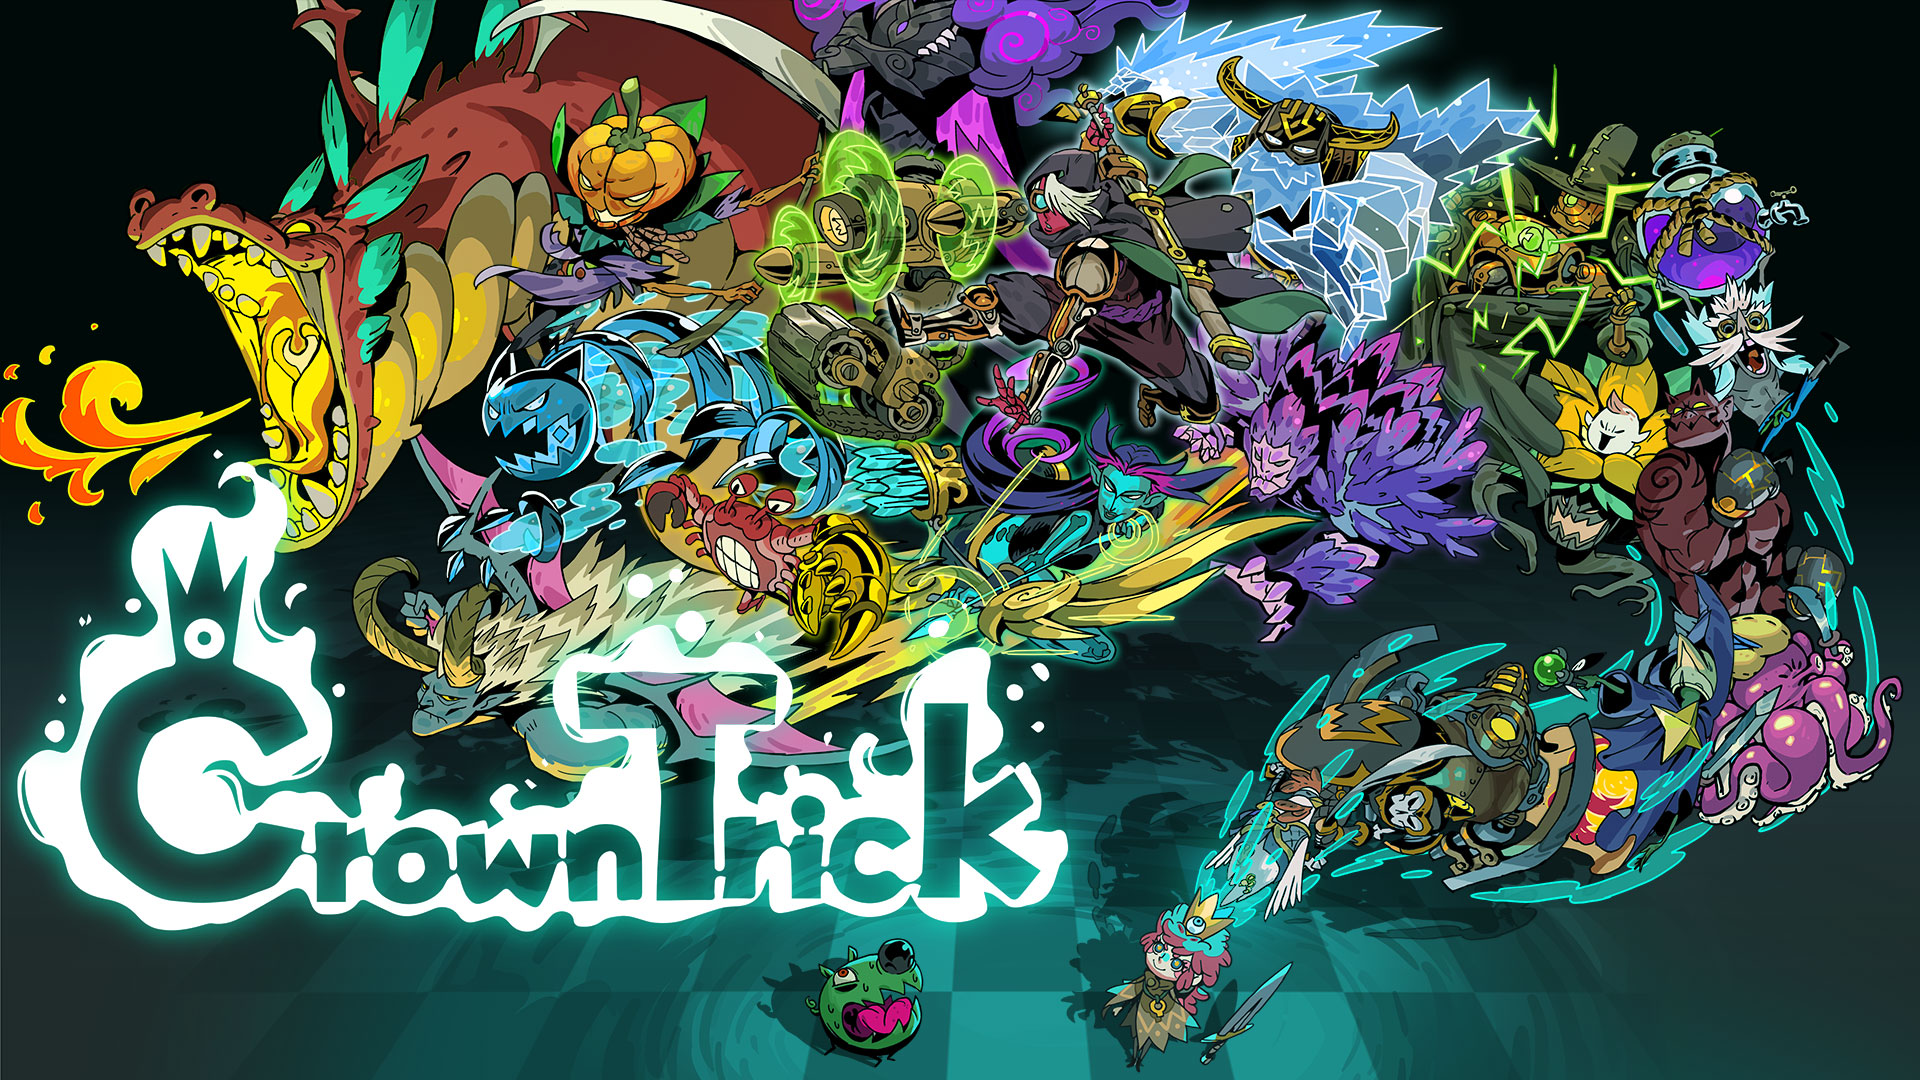 Crown Trick PC Download Free Full Game For windows